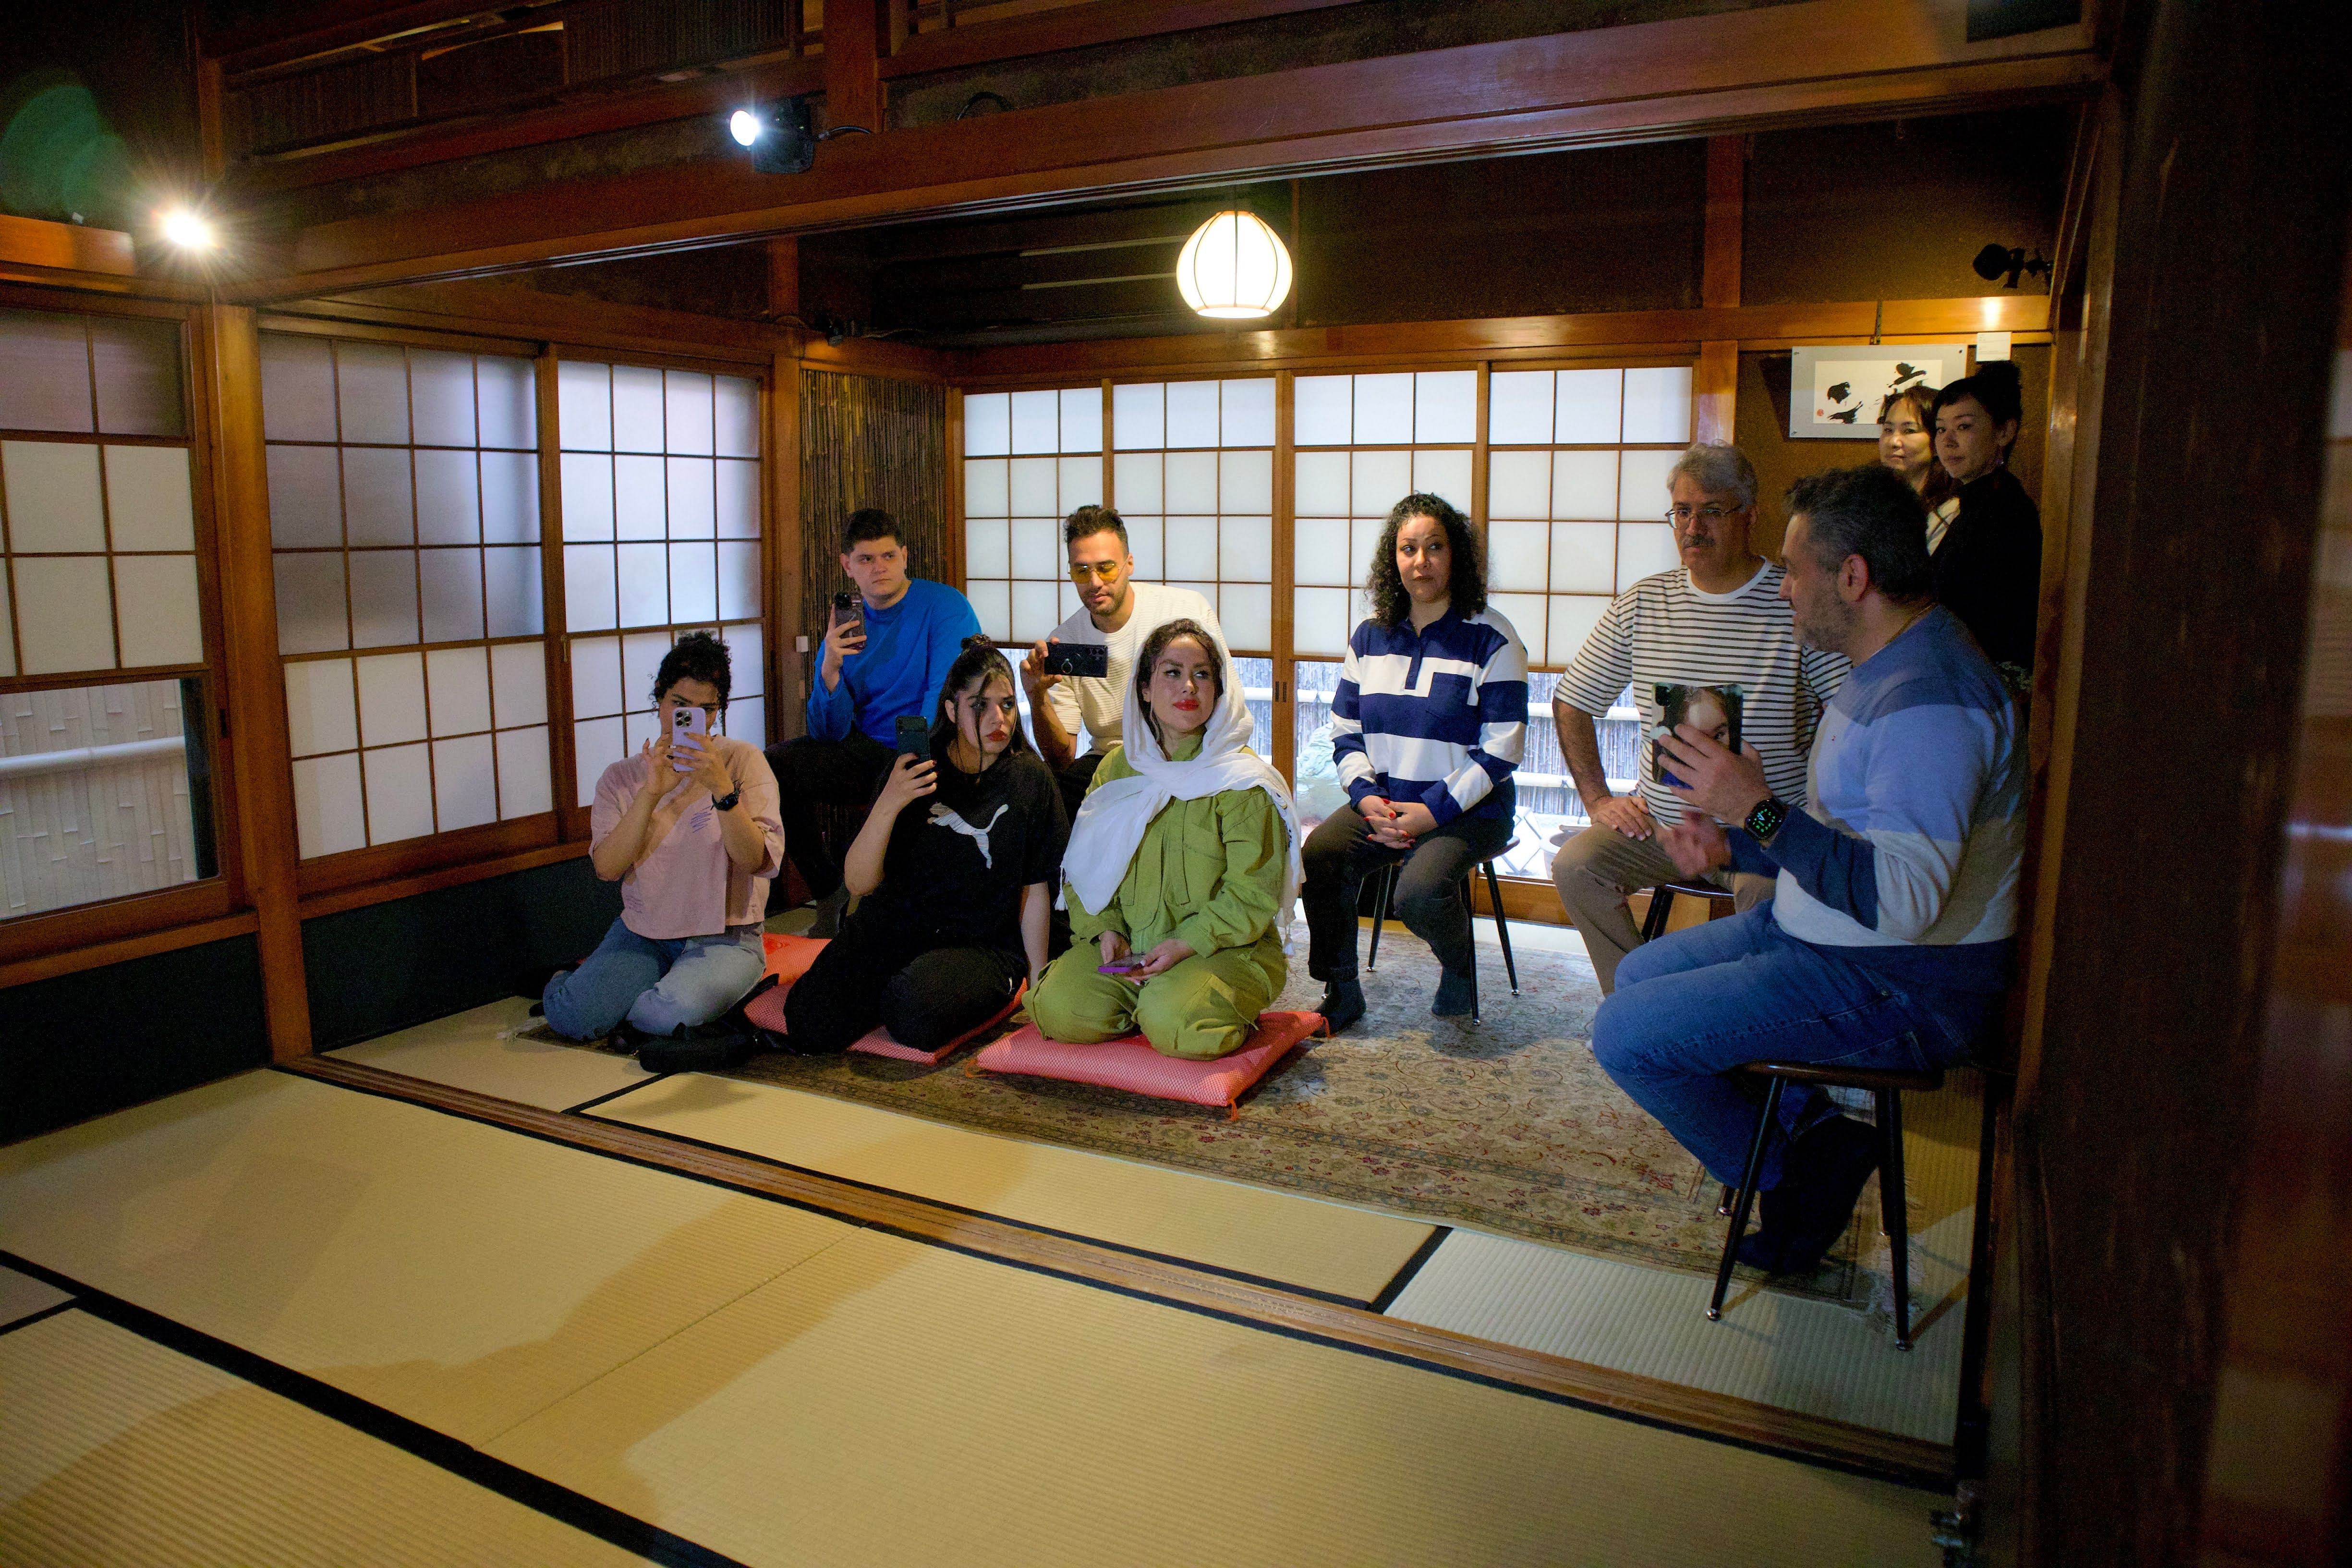 [private booking][Asakusa] Adventure: Drama Show and Action Experience in the Edo Period!